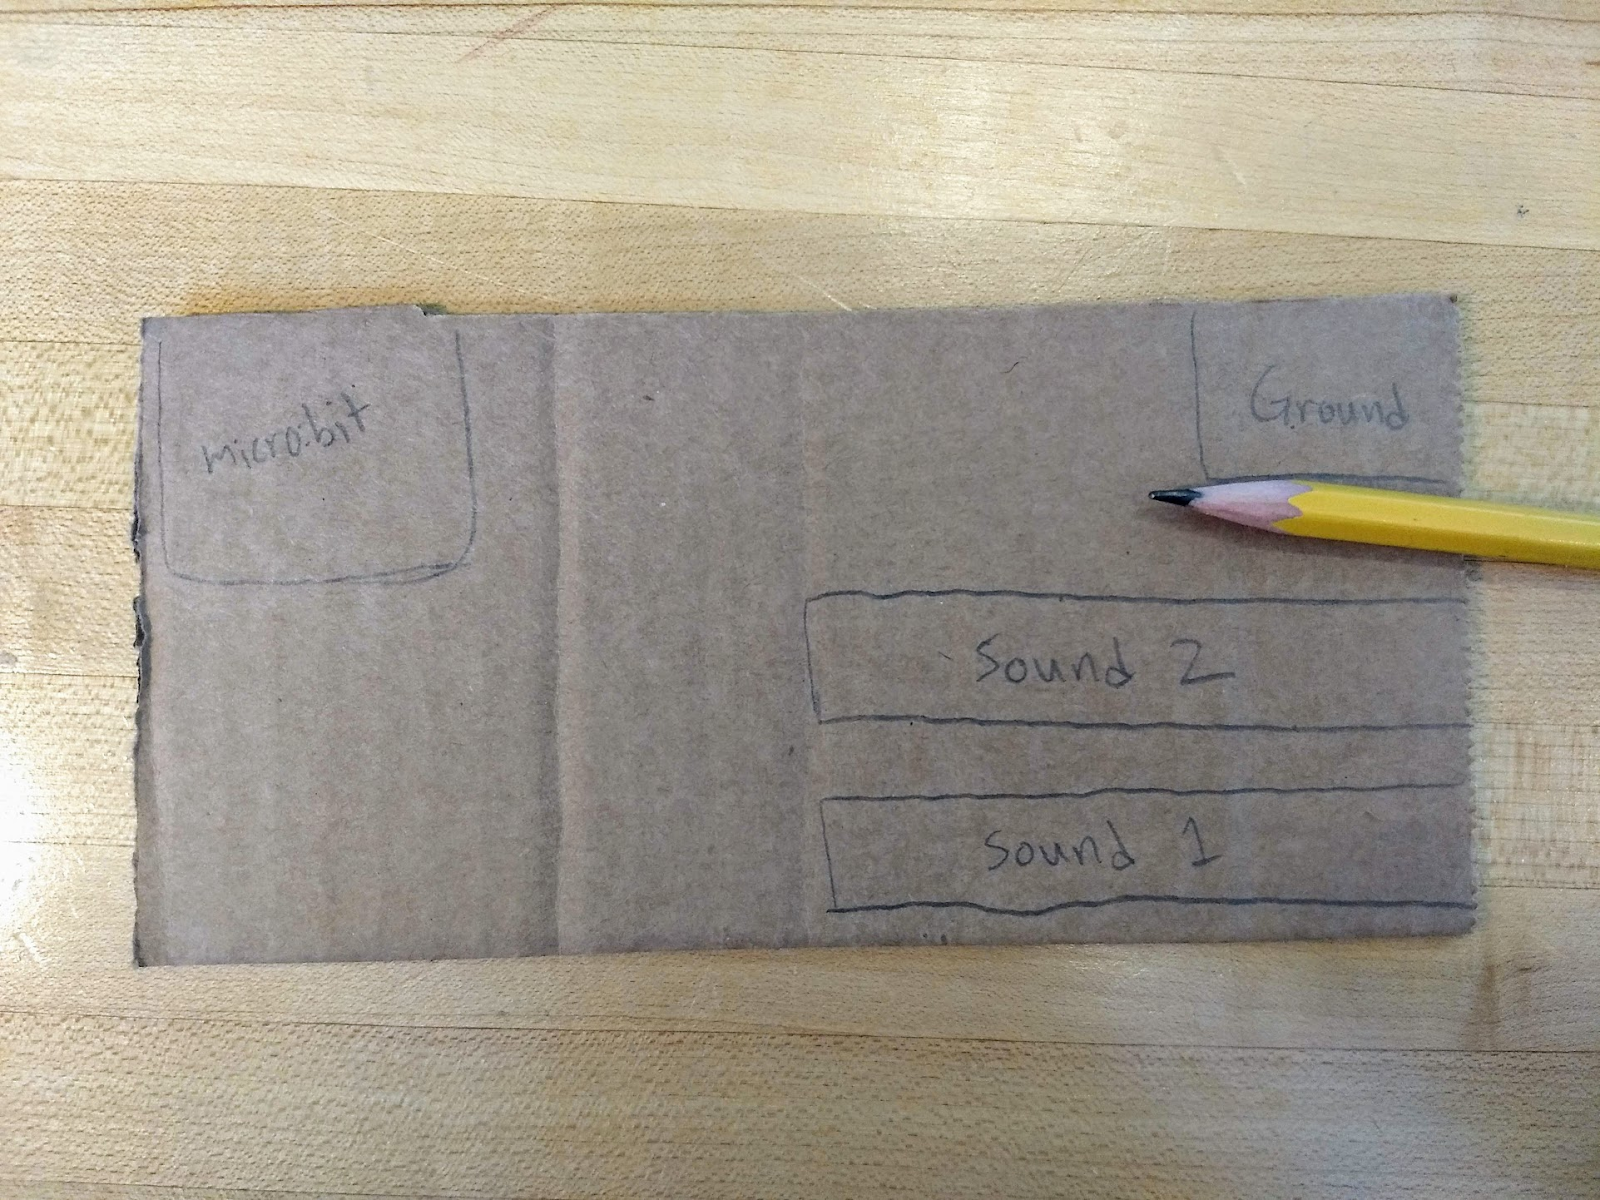 1. Draw out what you want your simple instrument to look like. You’ll need space for the micro:bit, ground, and however many sounds you want your instrument to make. Here we show two different sounds.